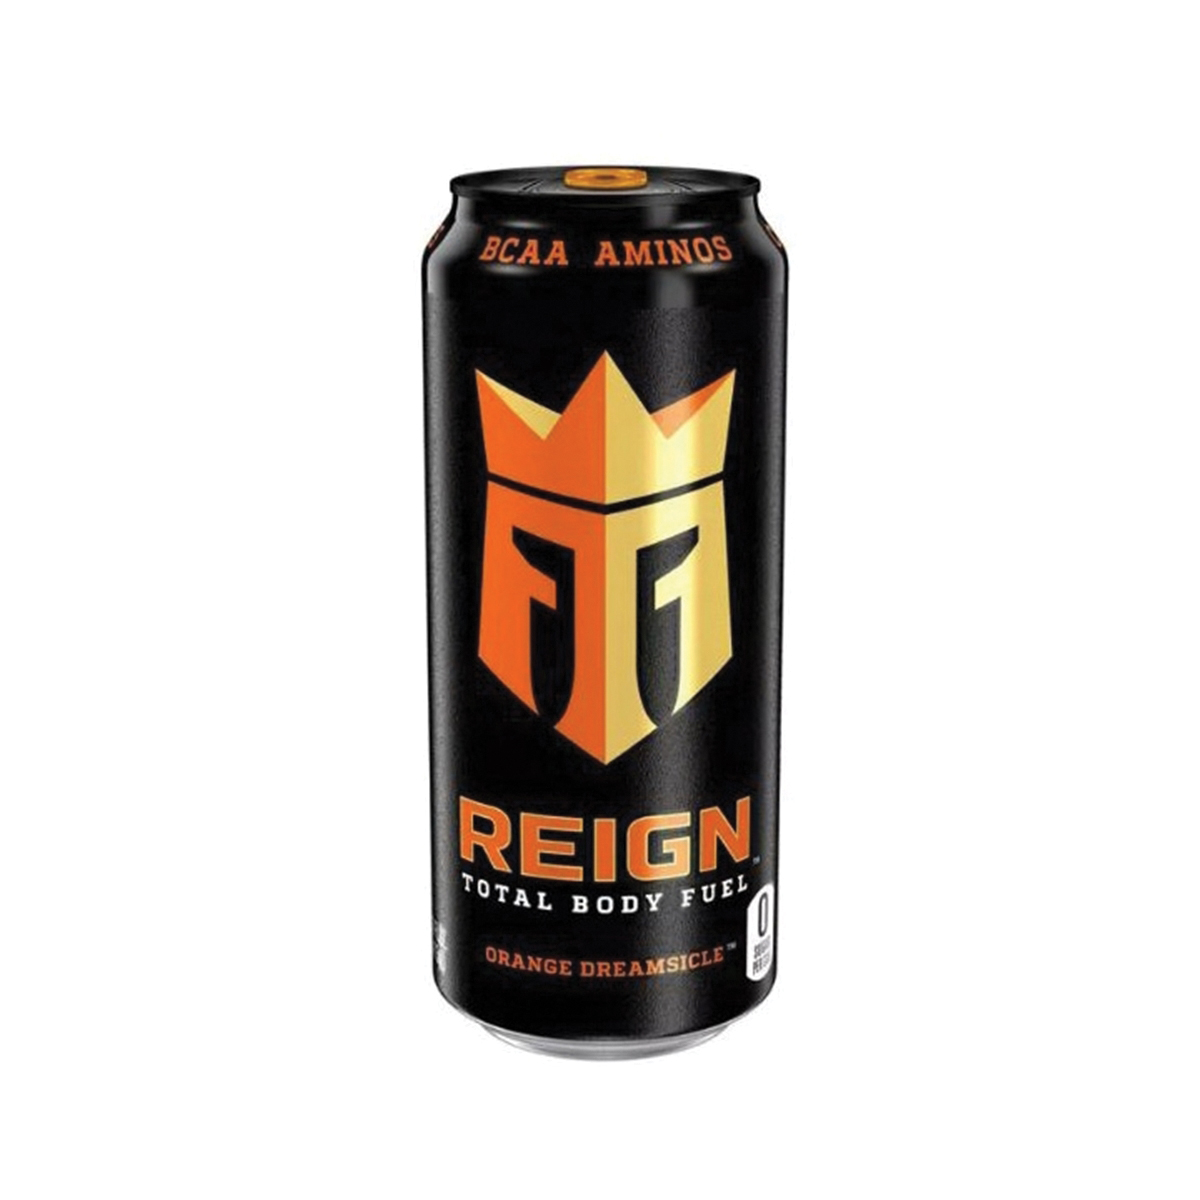 REIGN 157135 Energy Drink, Orange Dreamsicle Flavor, 16 oz Can